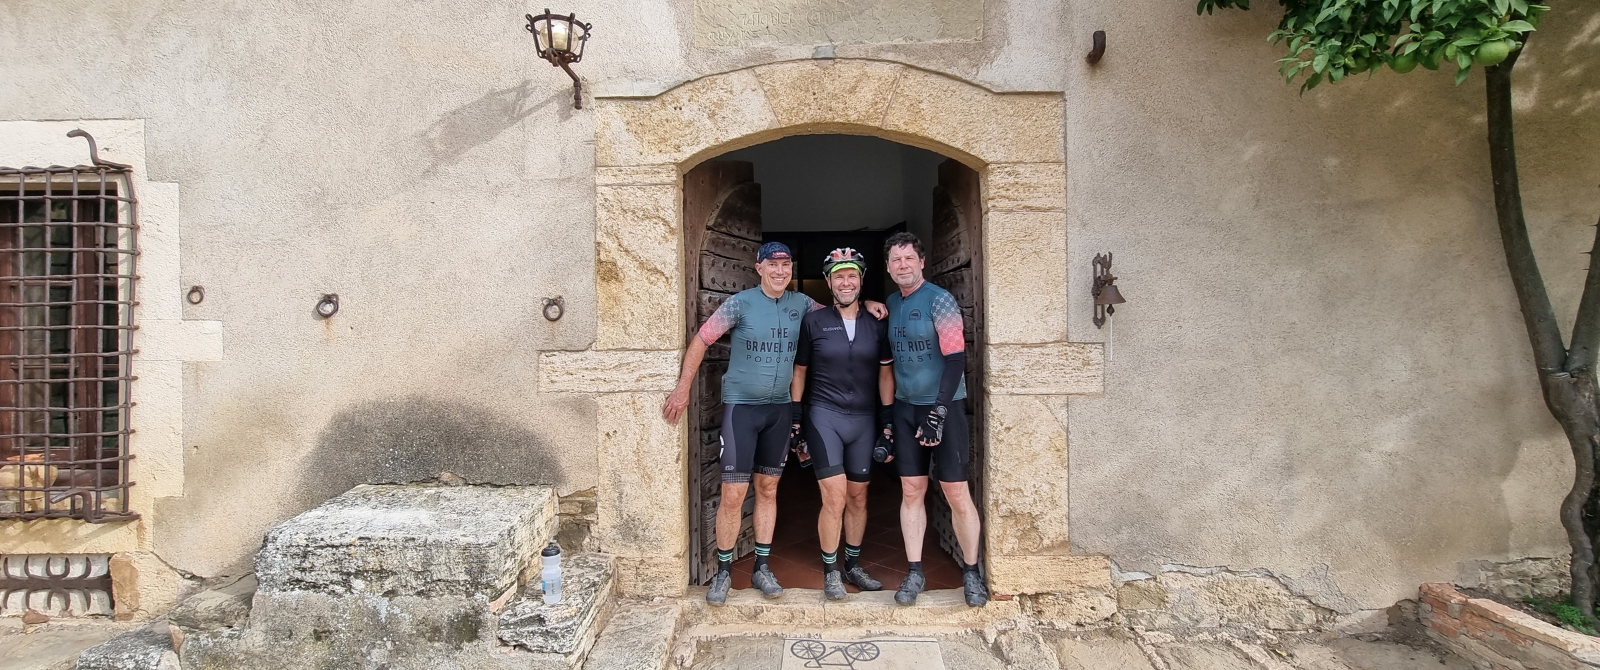 Three gravel cyclists pose in a stone door frame